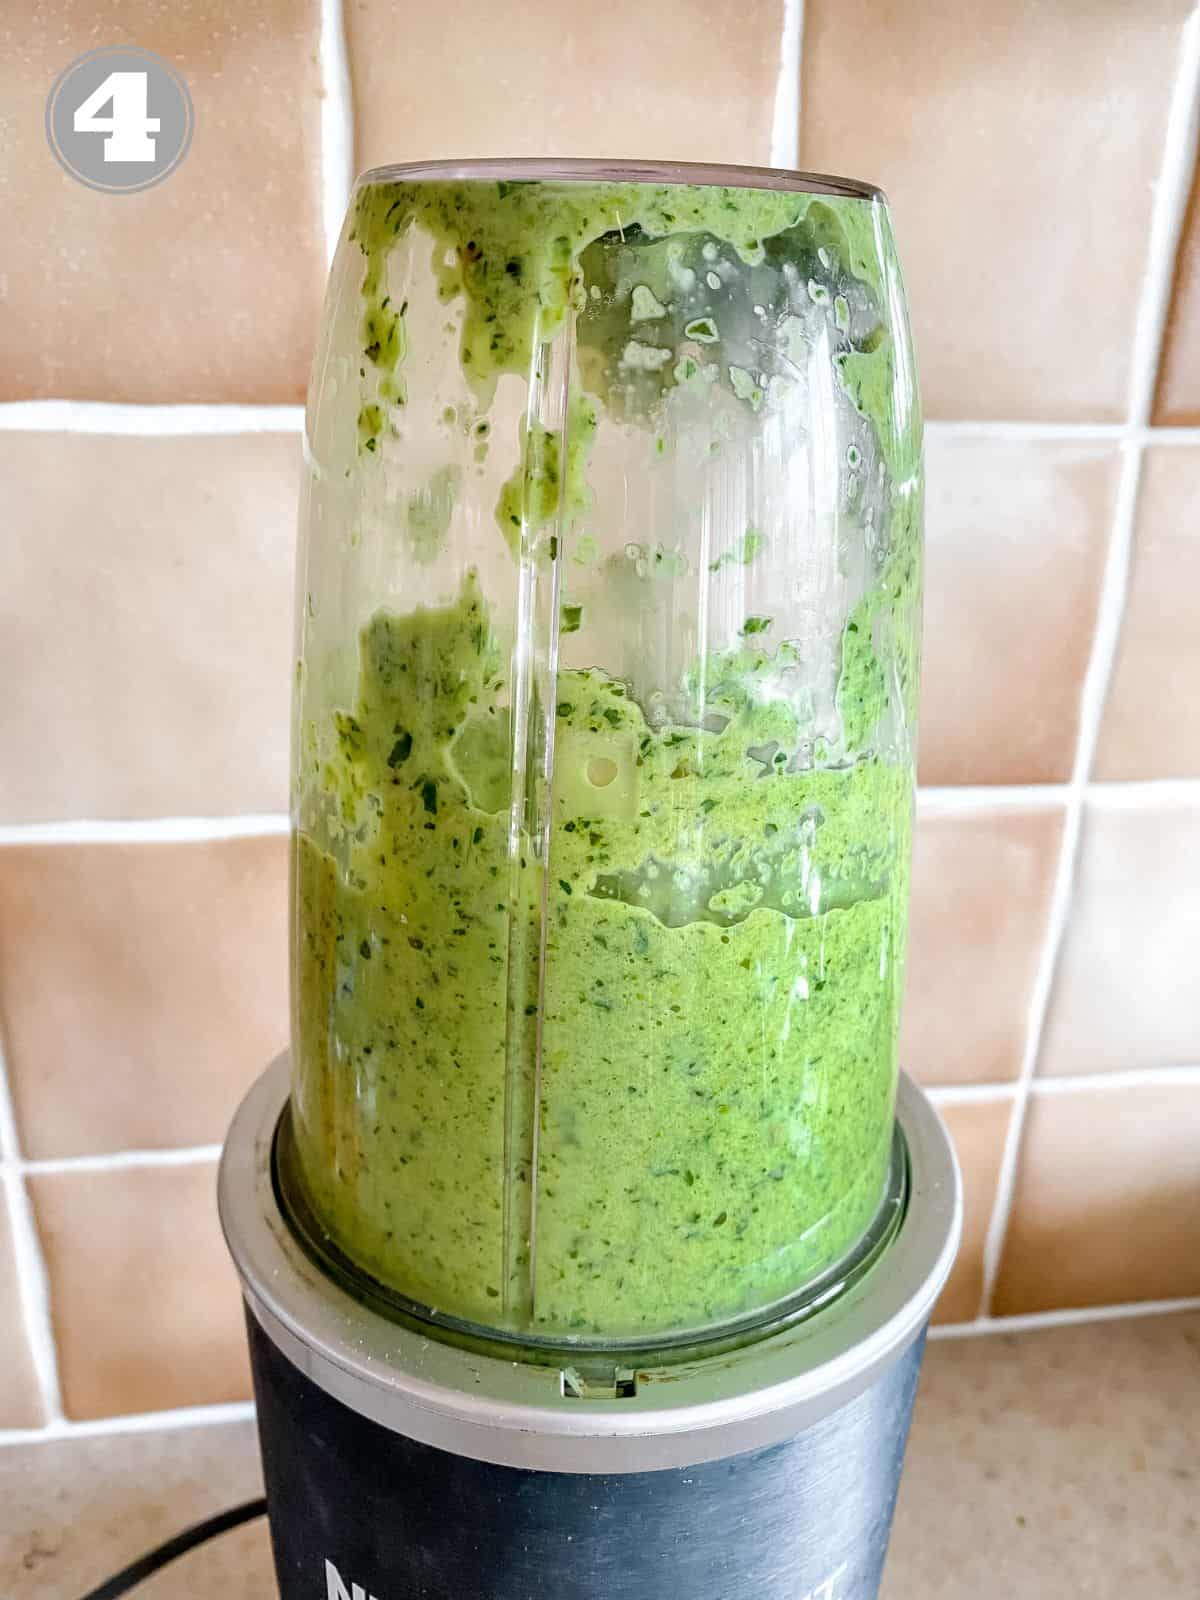 green pasta sauce in a blender in front of a brown tiled wall.